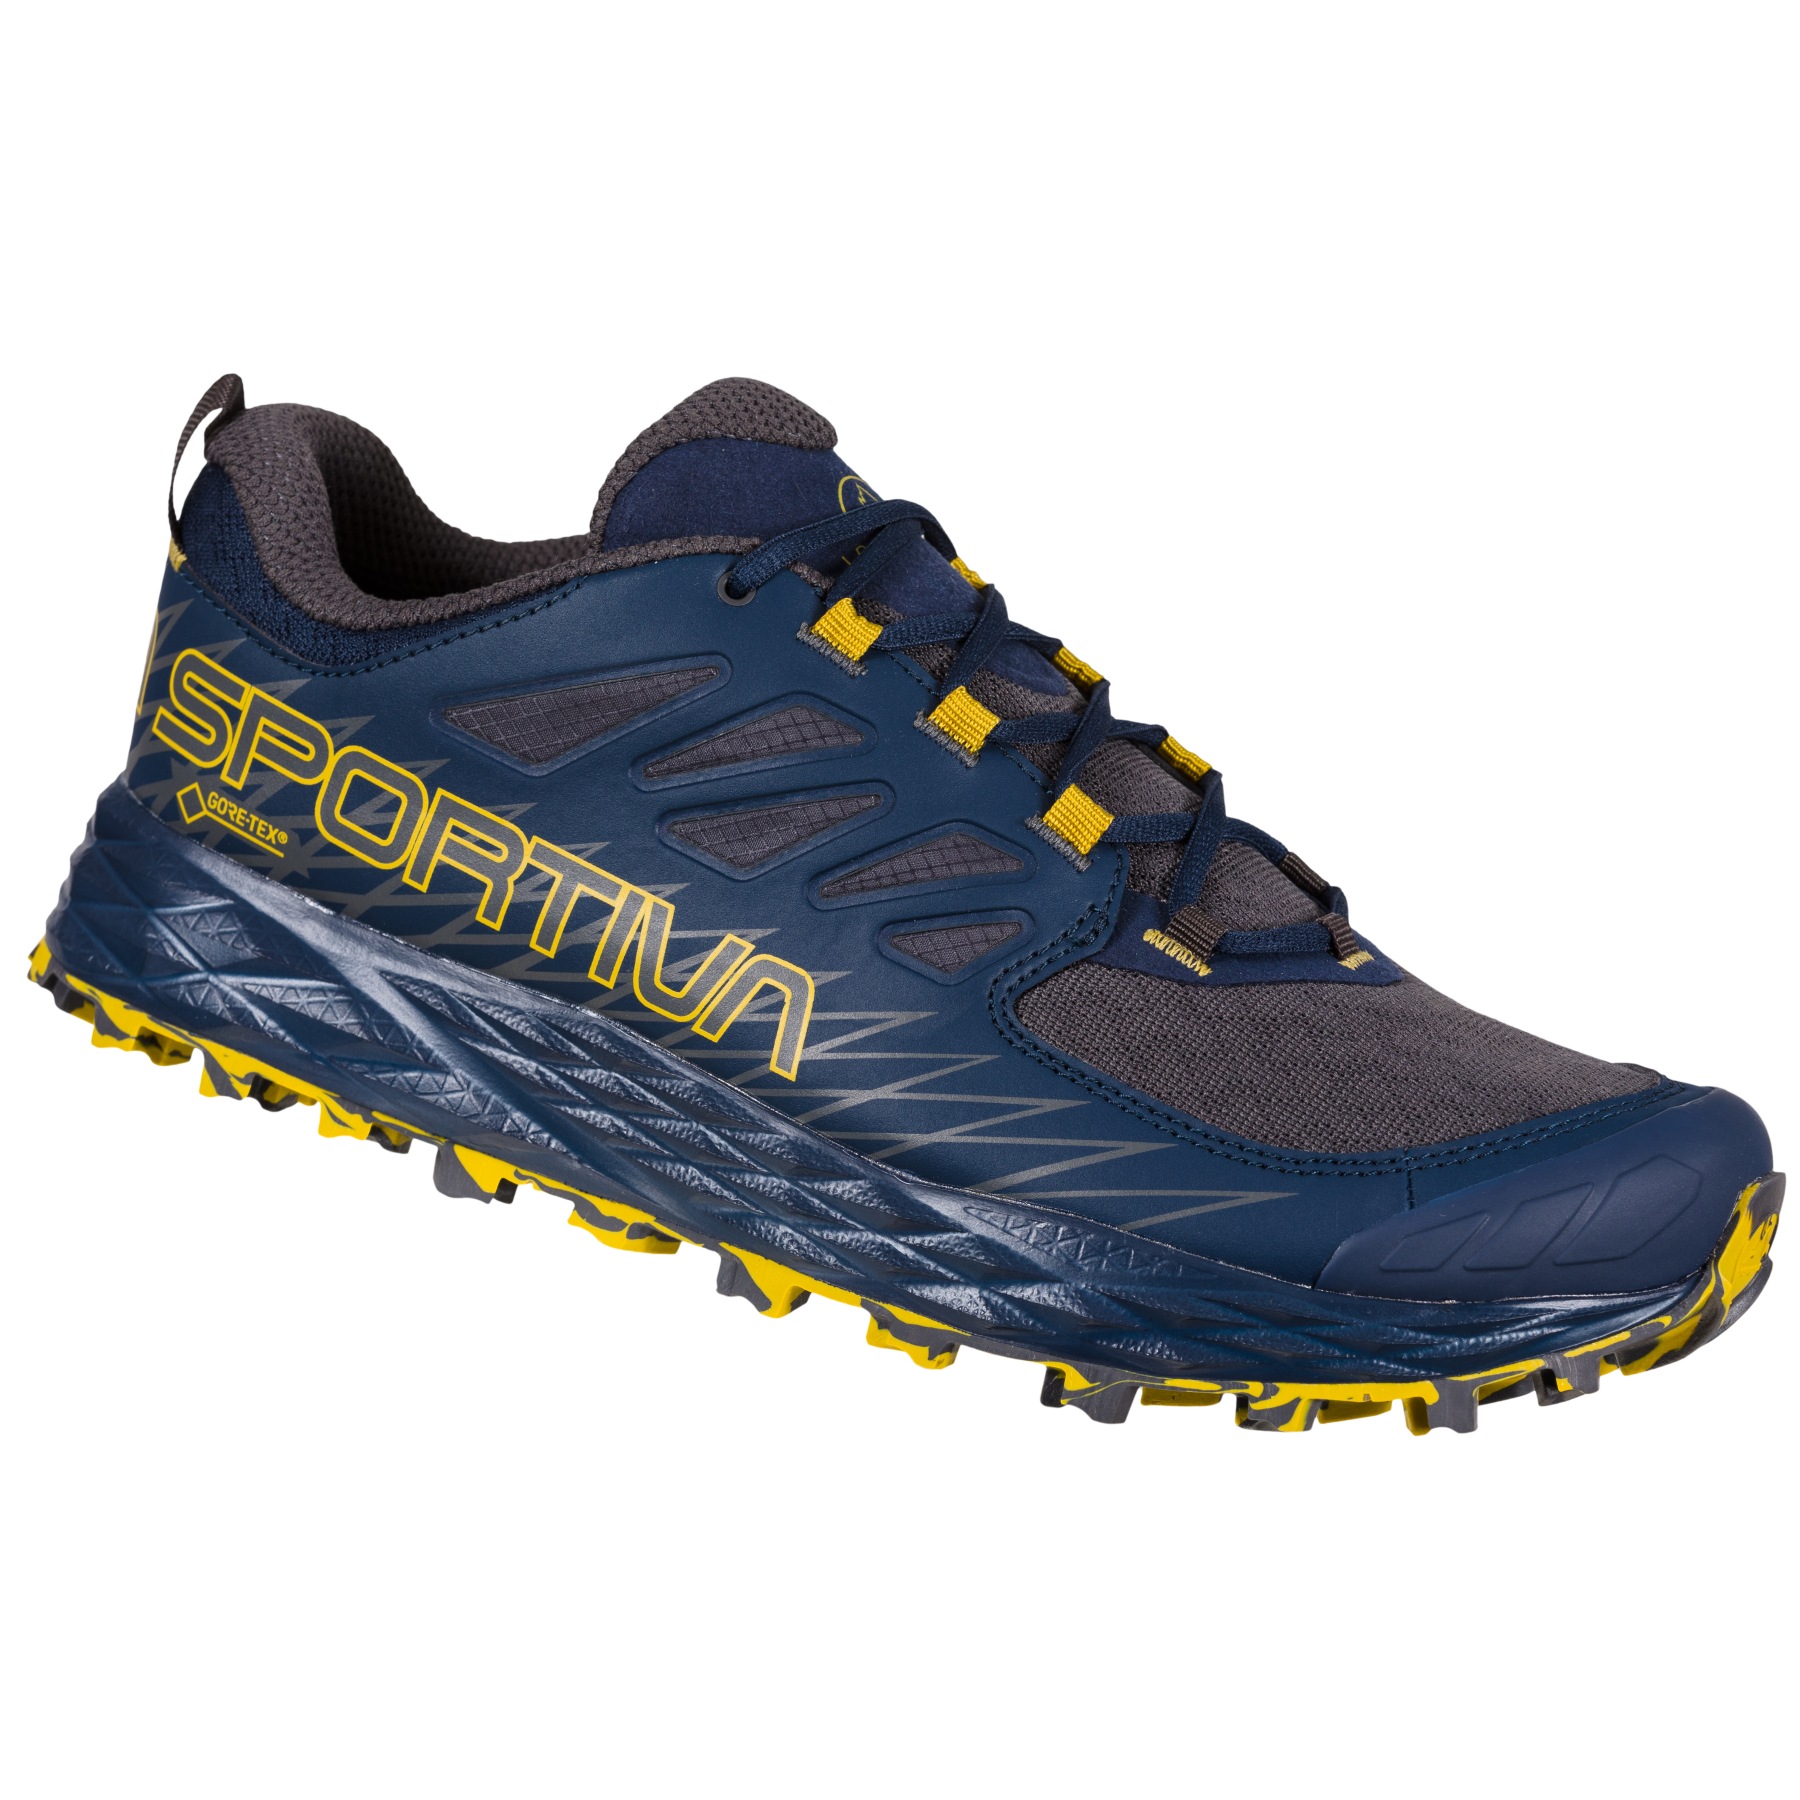 Picture of La Sportiva Lycan GTX Running Shoes - Night Blue/Moss